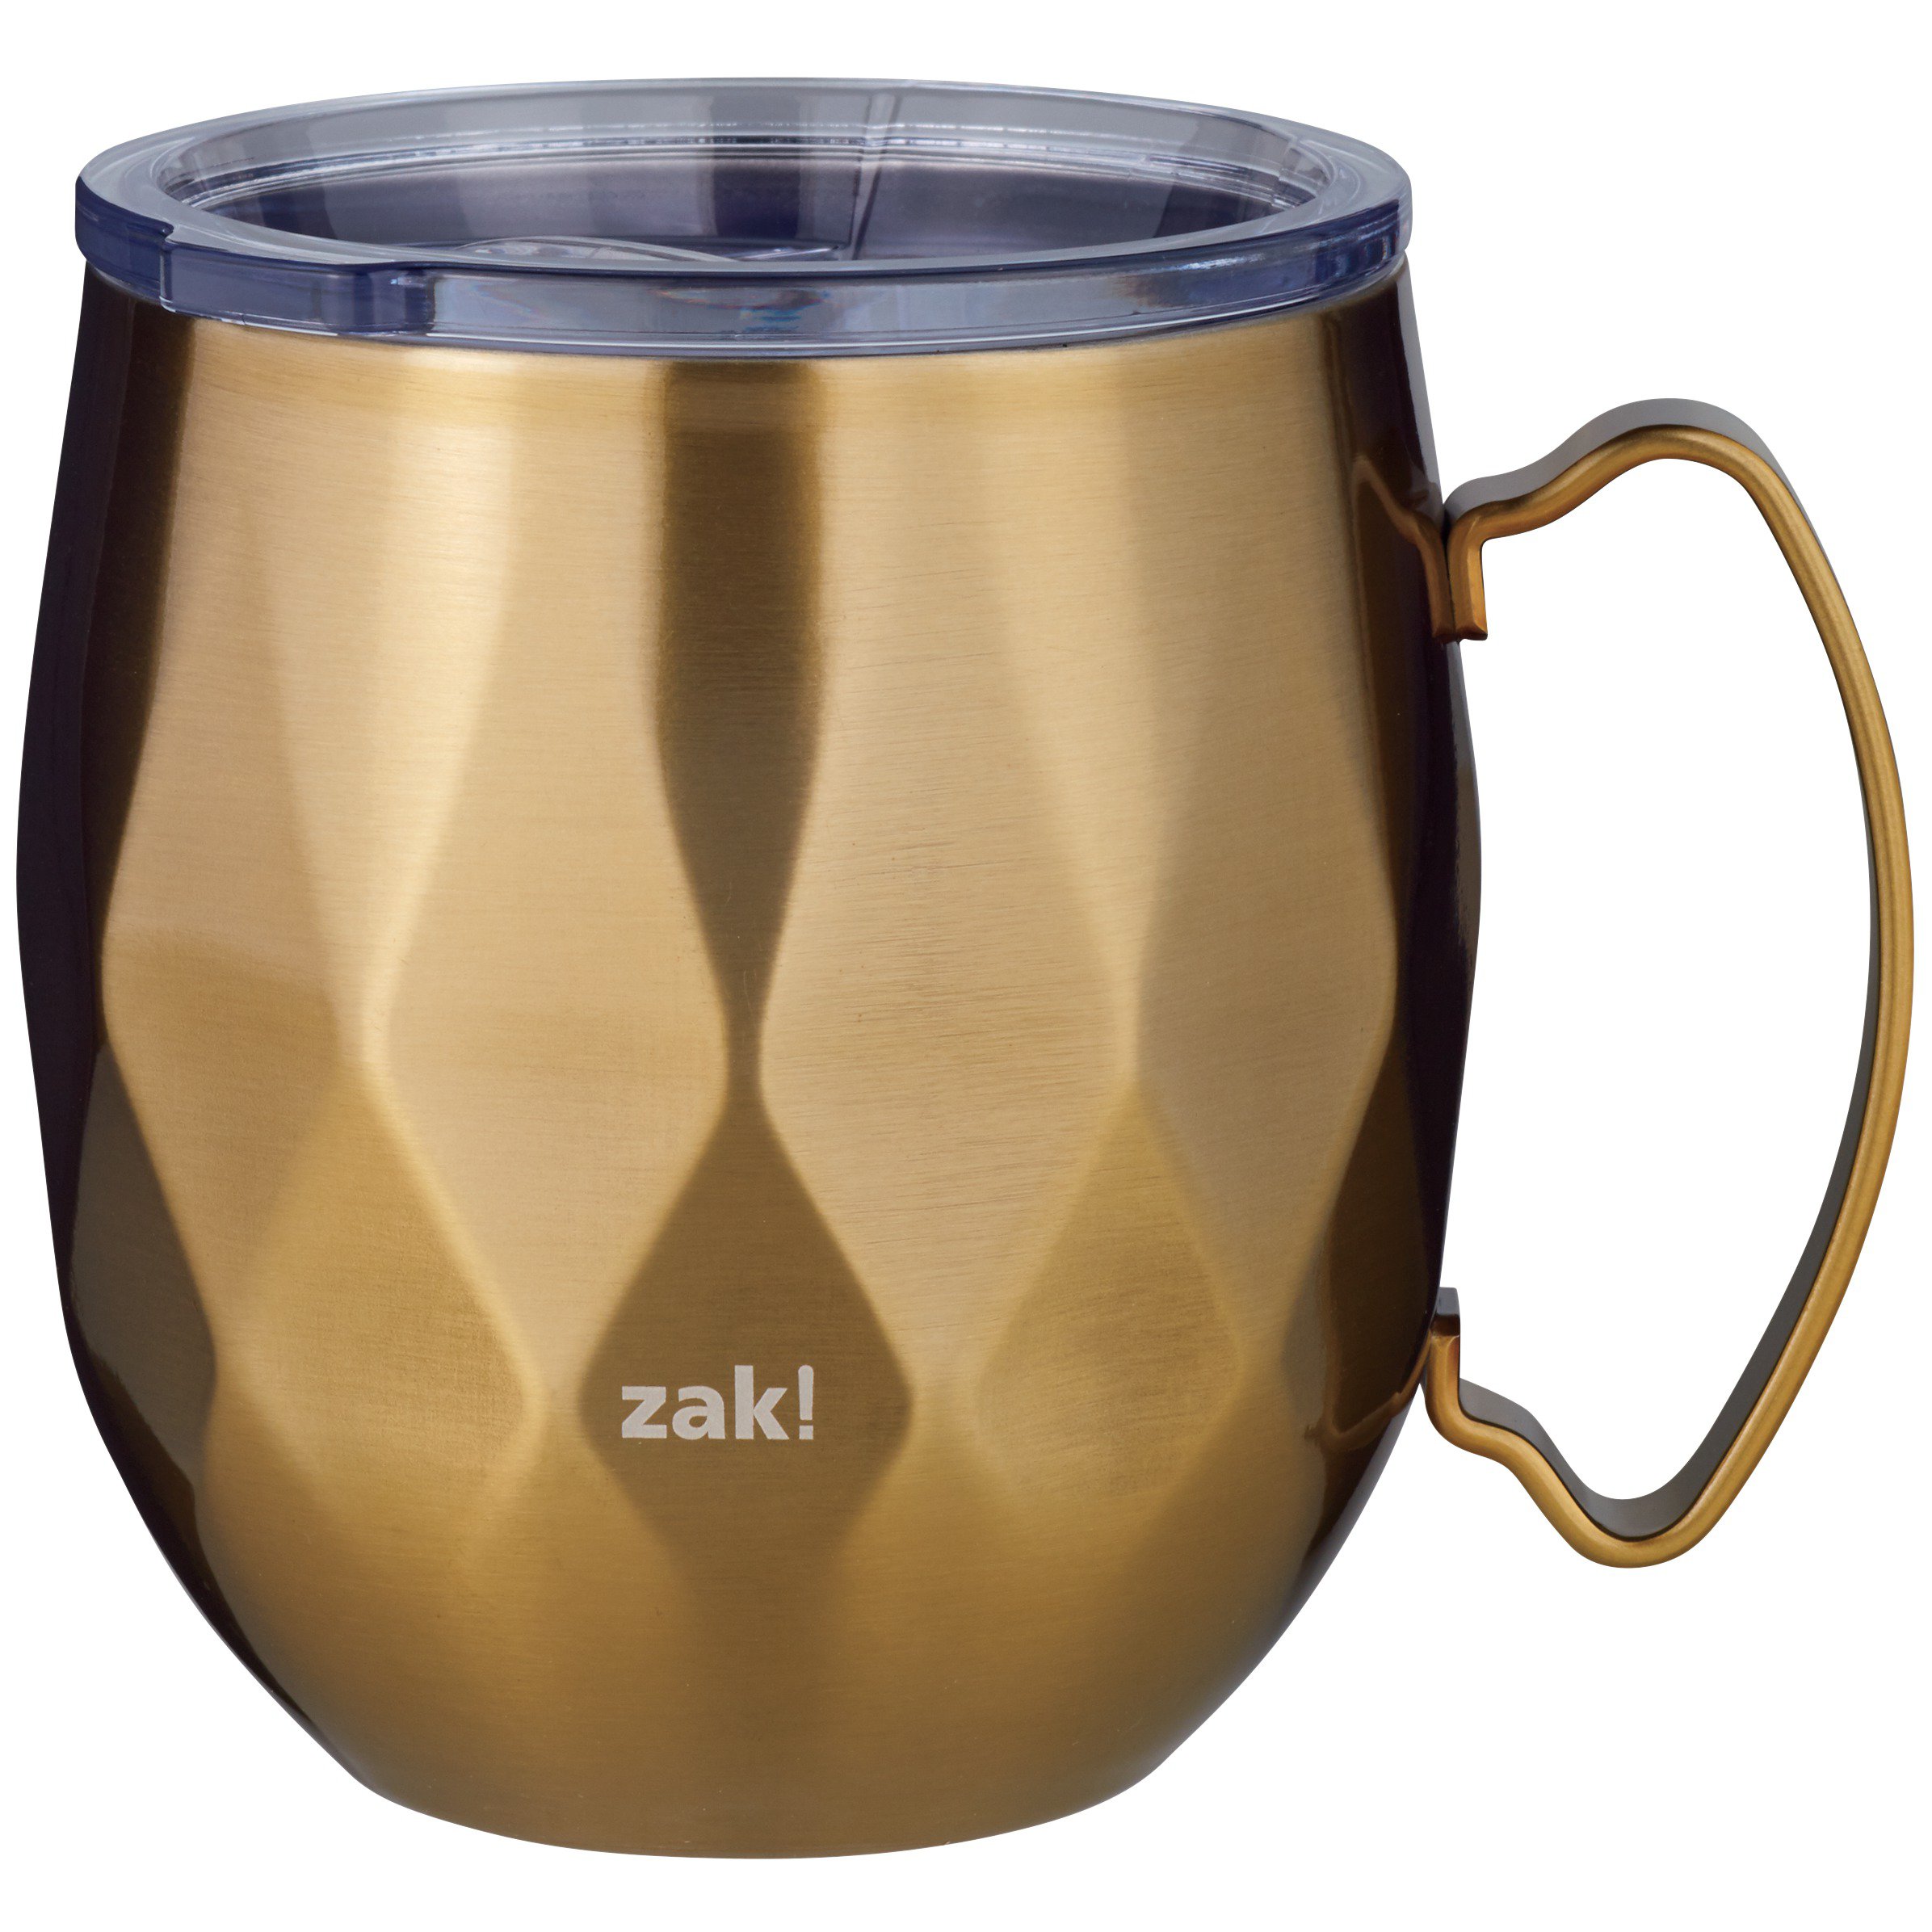 Zak Designs 19 oz Fractal Mule Mug Stainless Steel Vacuum Insulated with Lid for Cold Hot Drinks Outdoor Indoor, Size: 19 fl oz, Red